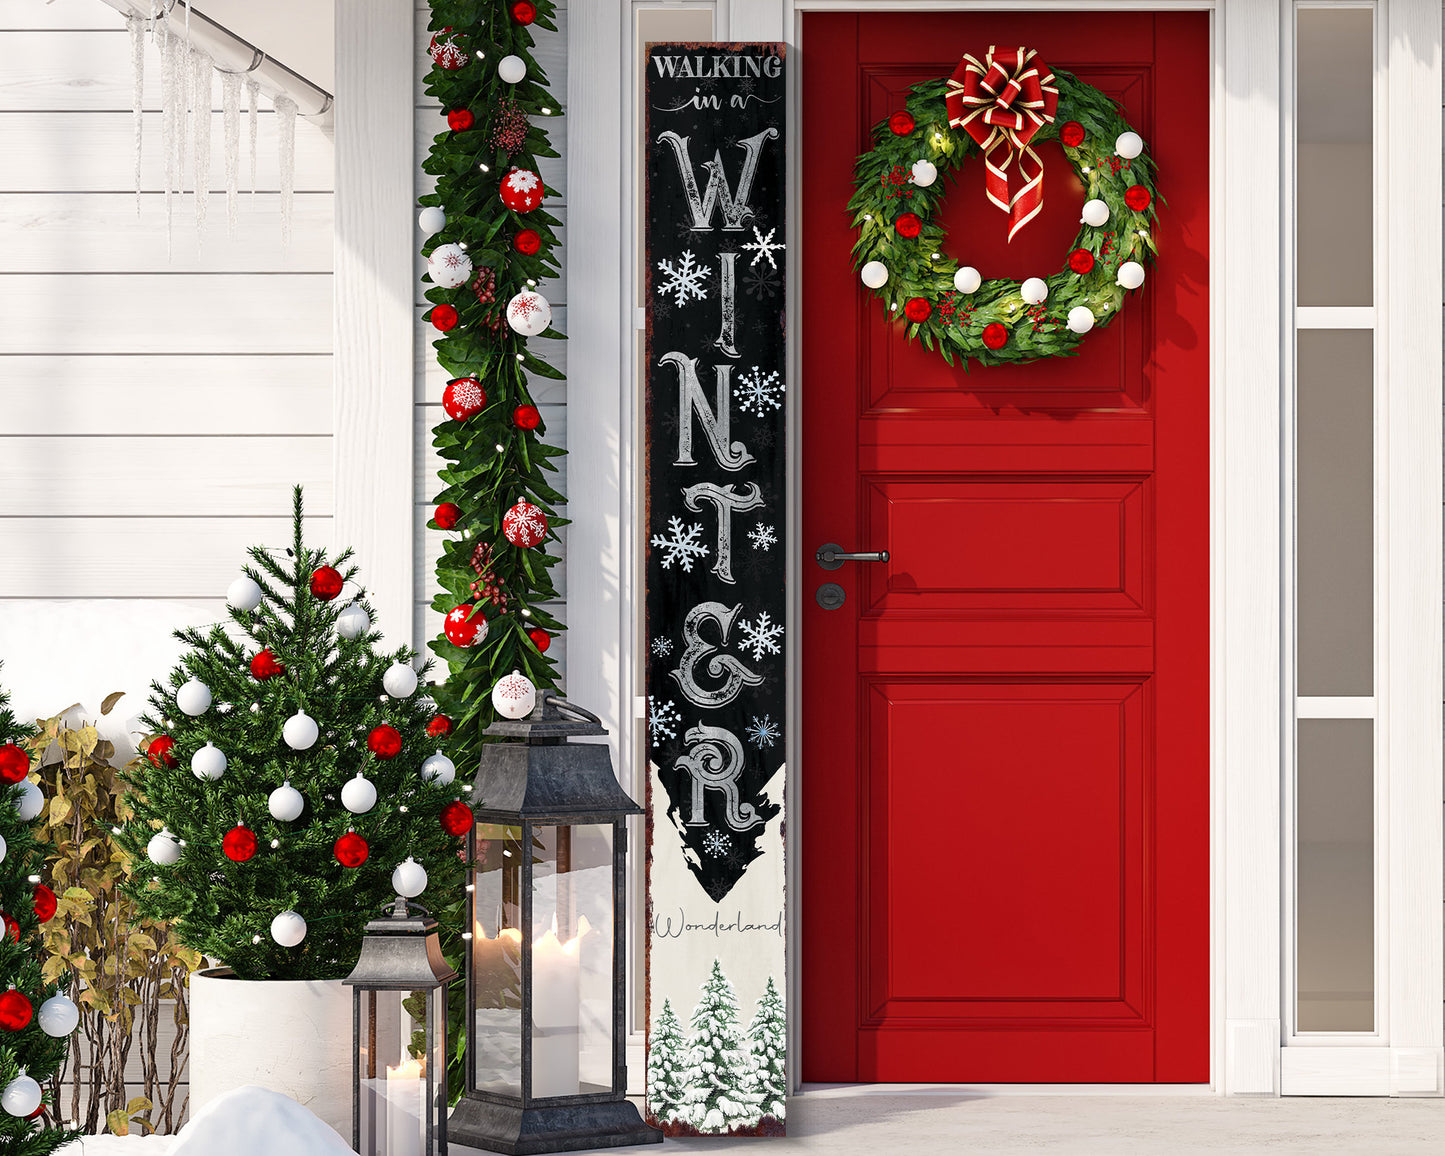 72in "Walking in a Winter Wonderland" Christmas Porch Sign - Front Porch Christmas Welcome Sign, Rustic Modern Farmhouse Entryway Board